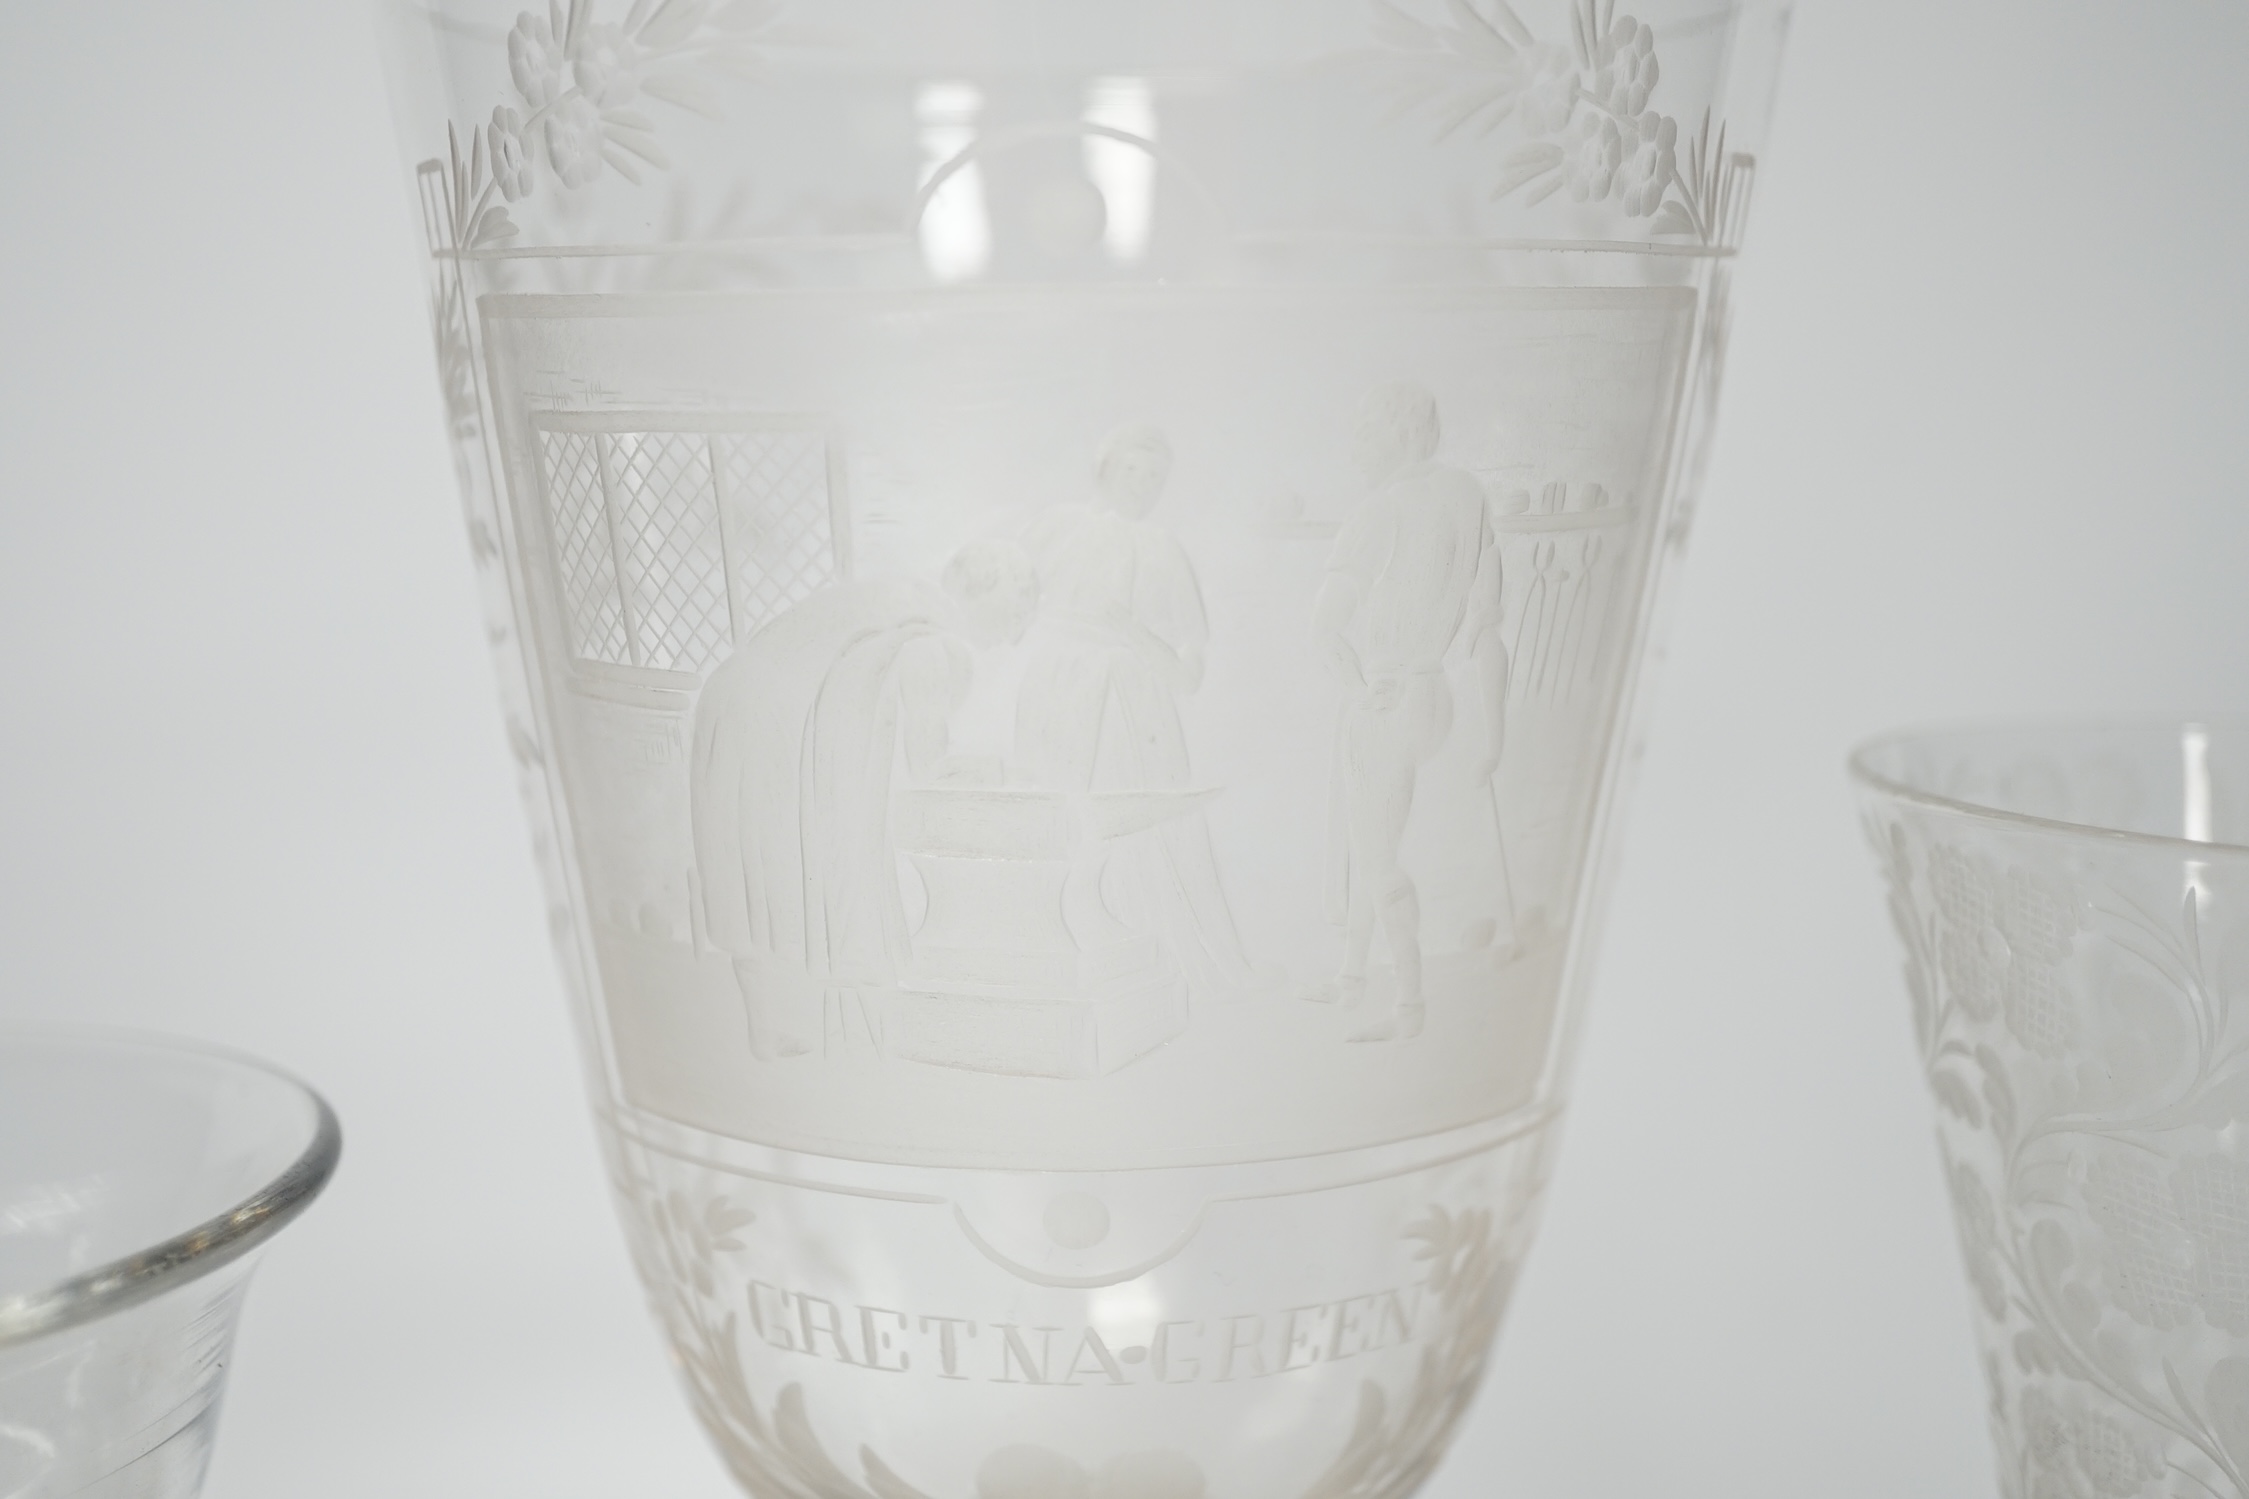 An 18th century sweetmeat glass, a 19th century large wheel engraved ‘Gretna Green’ goblet and a similar floral engraved glass, tallest 23cm. Condition good